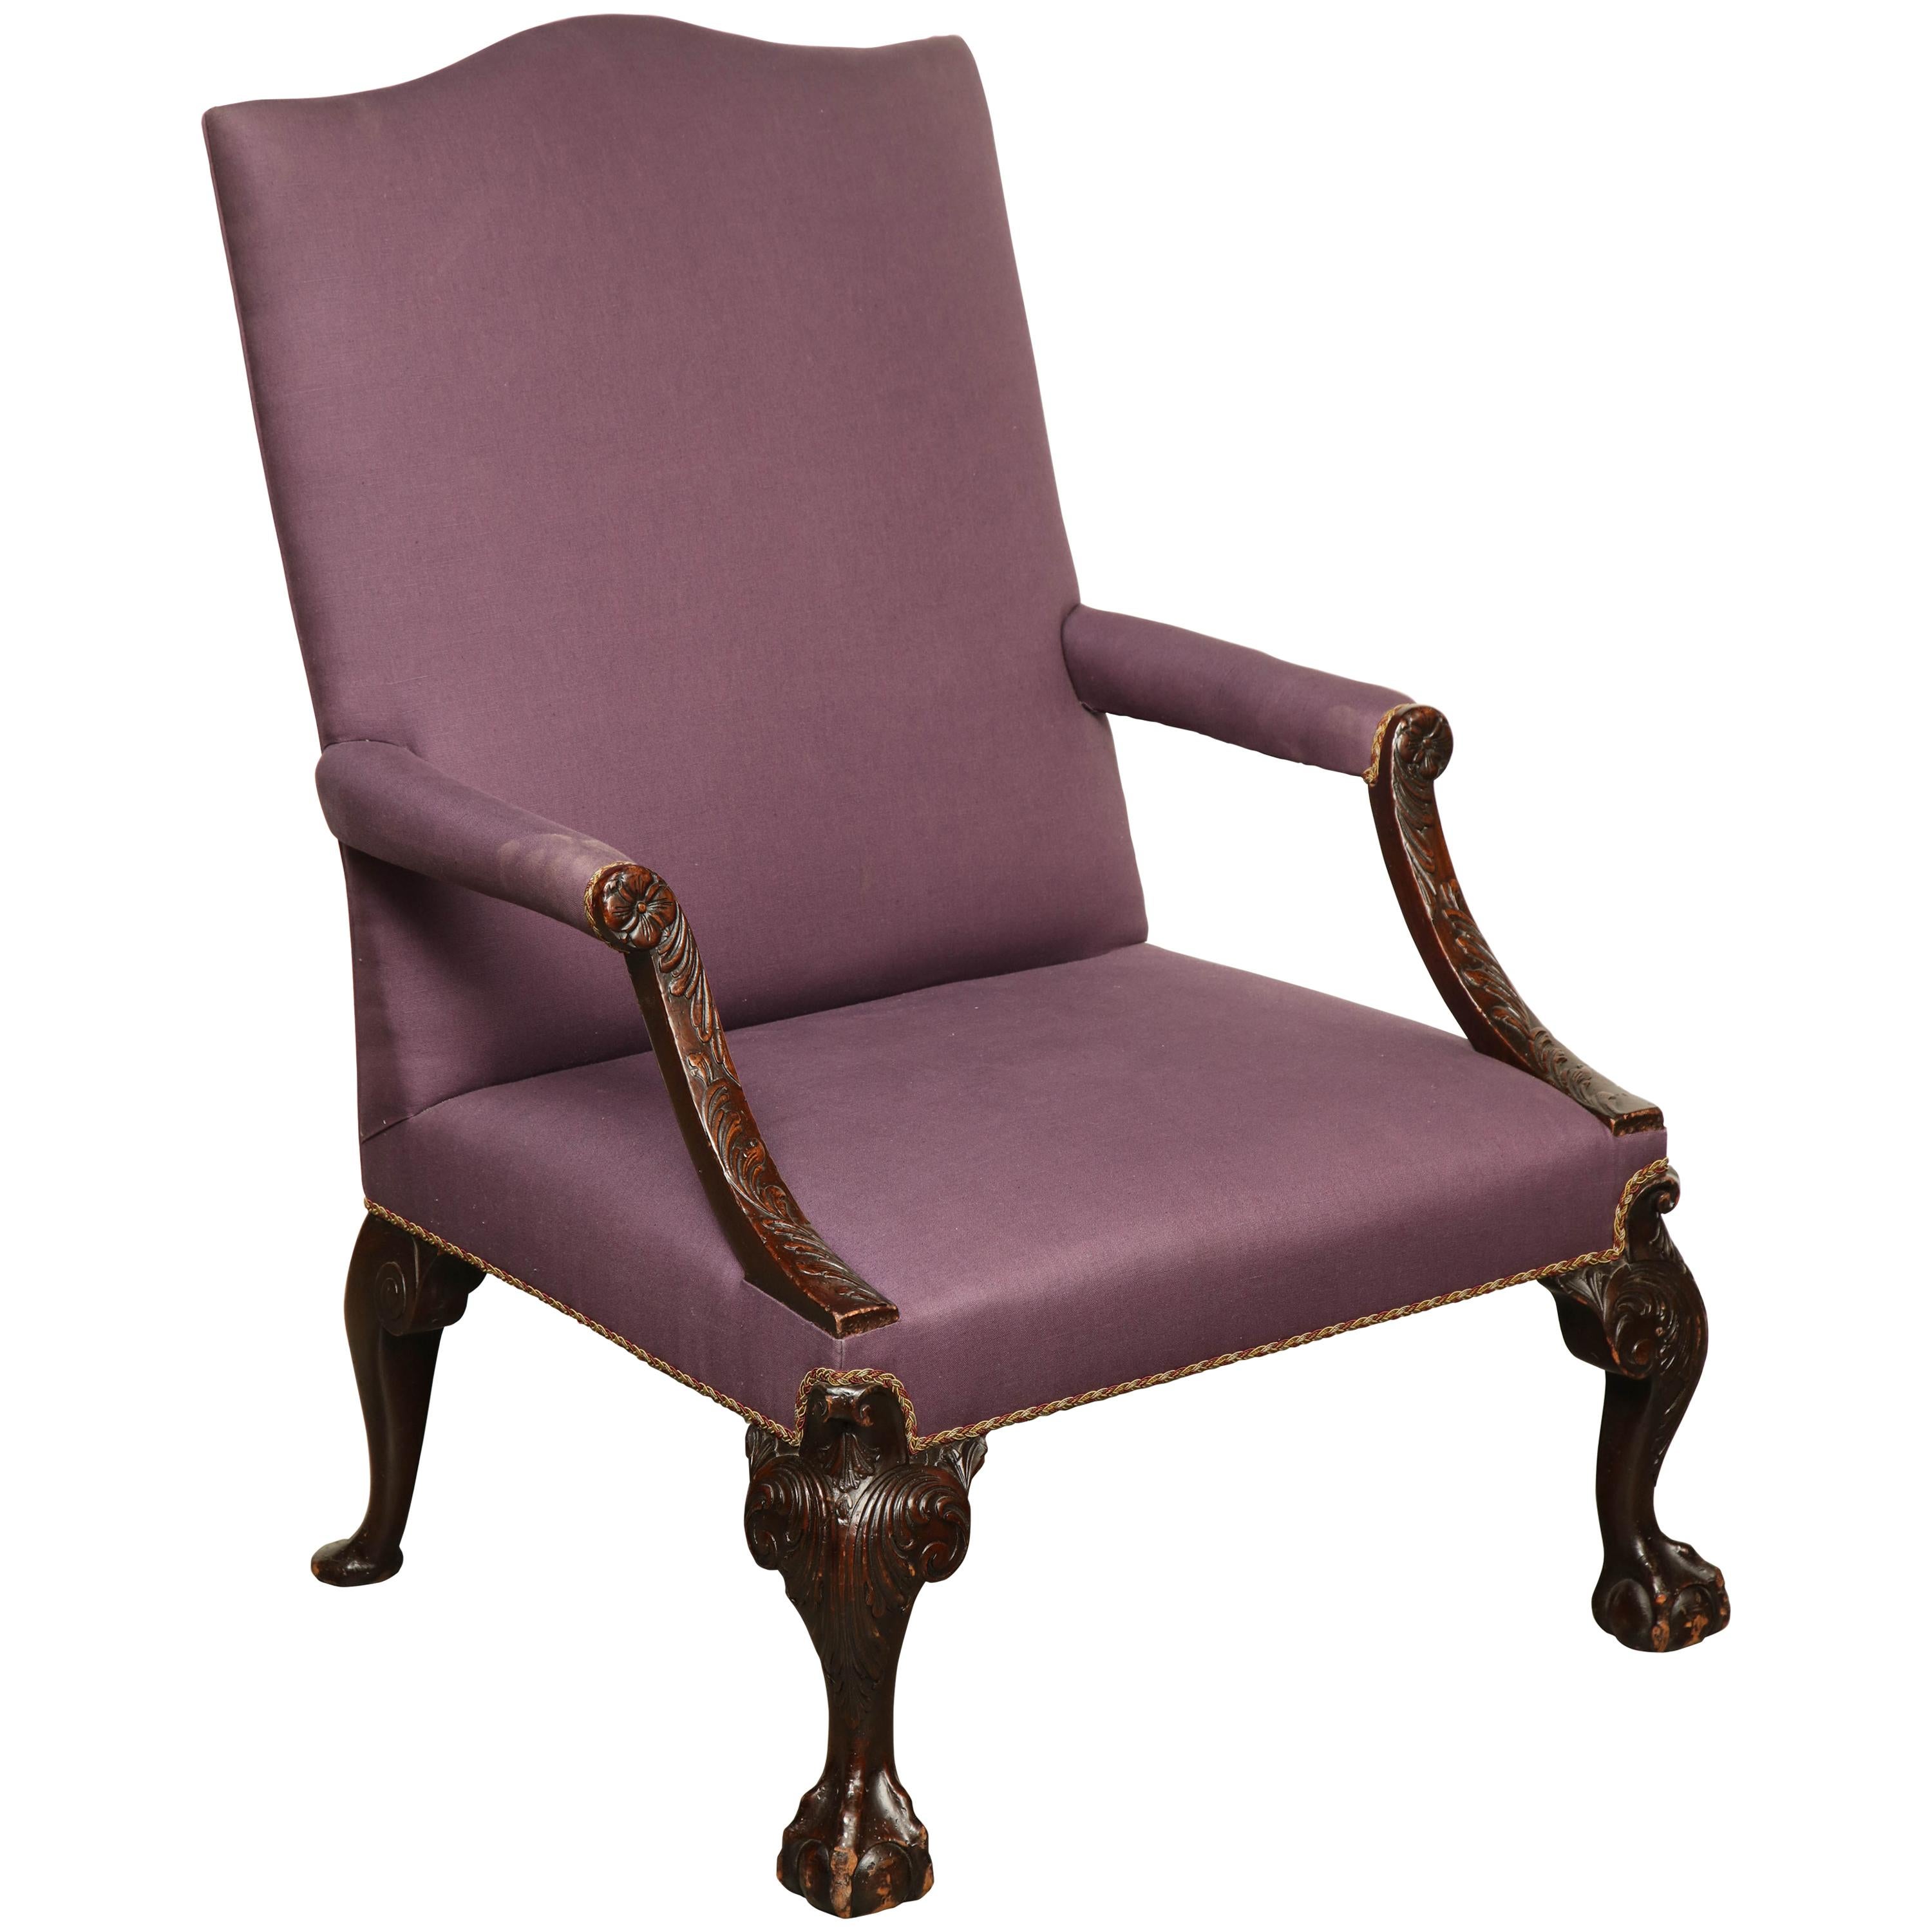 George II Ball and Claw Foot Gainsborough Armchair